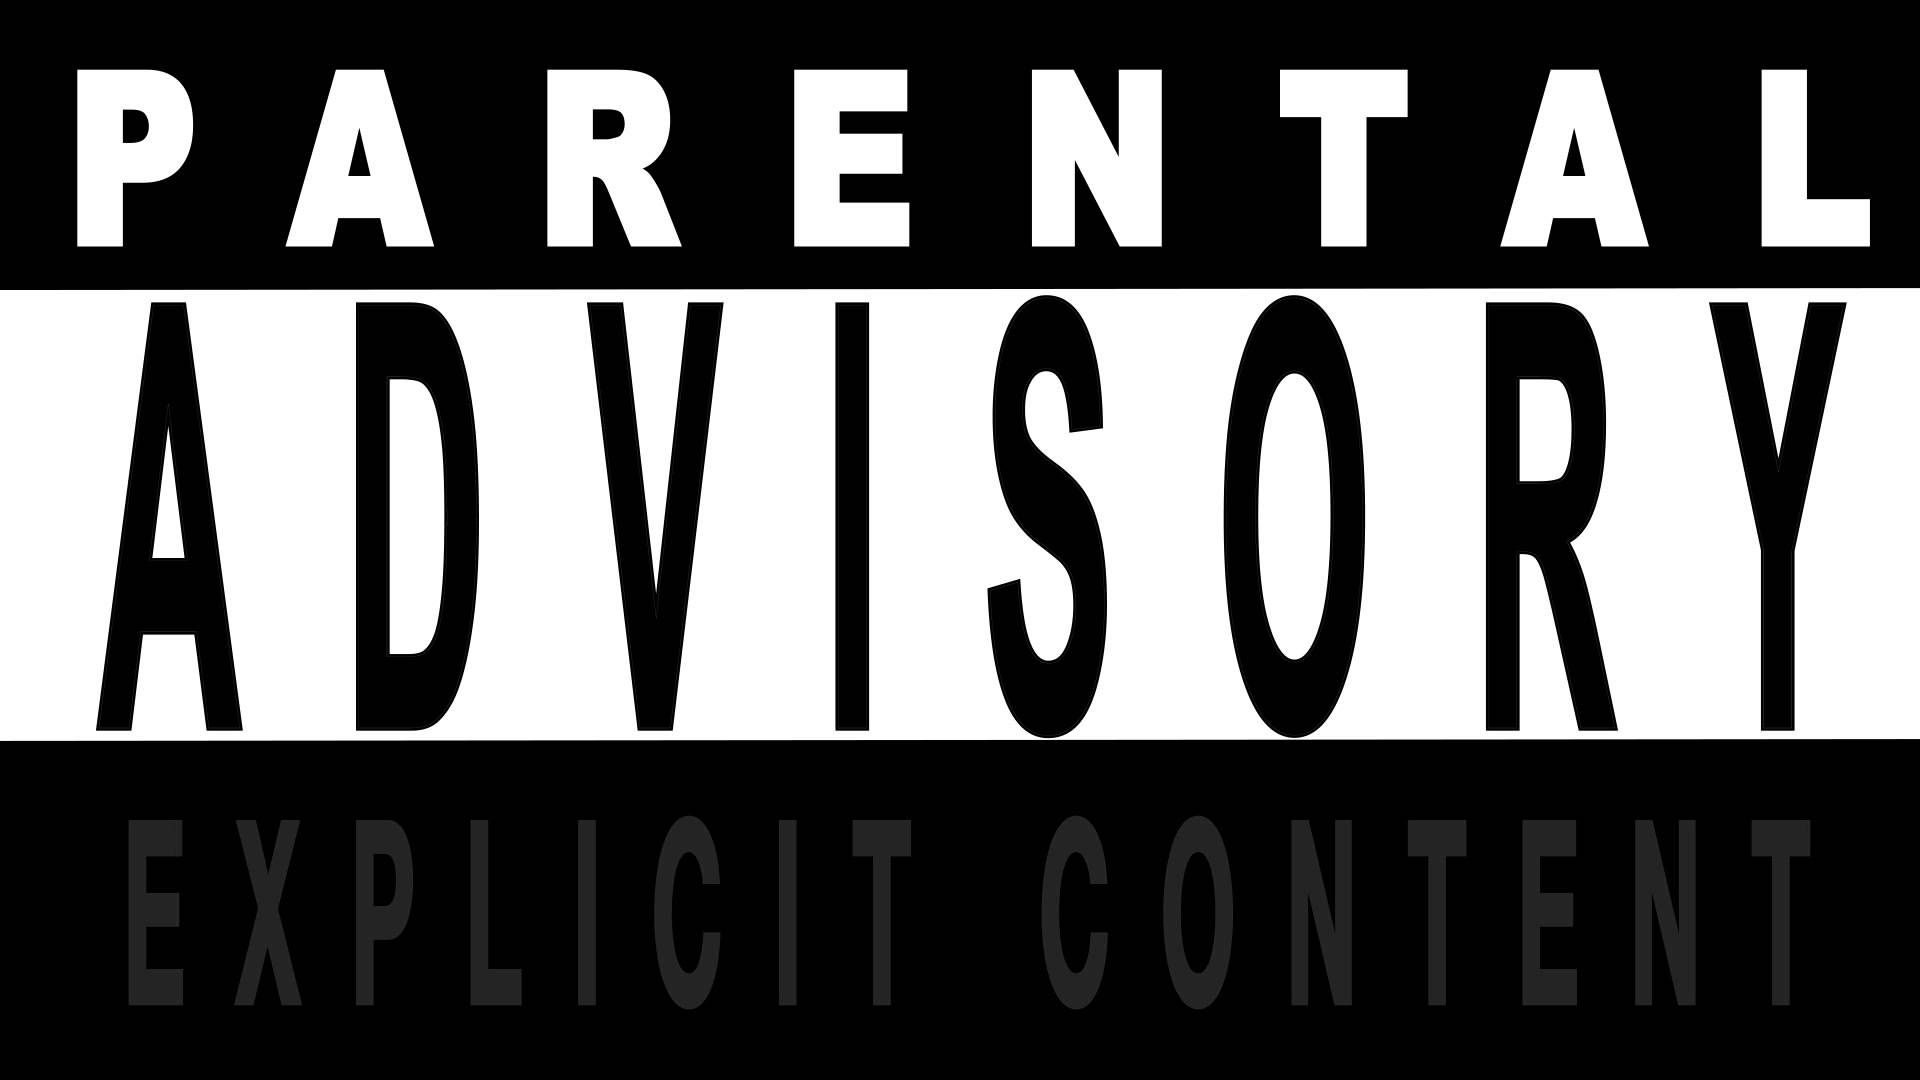 Create Own Parental Advisory Pictures to Pin